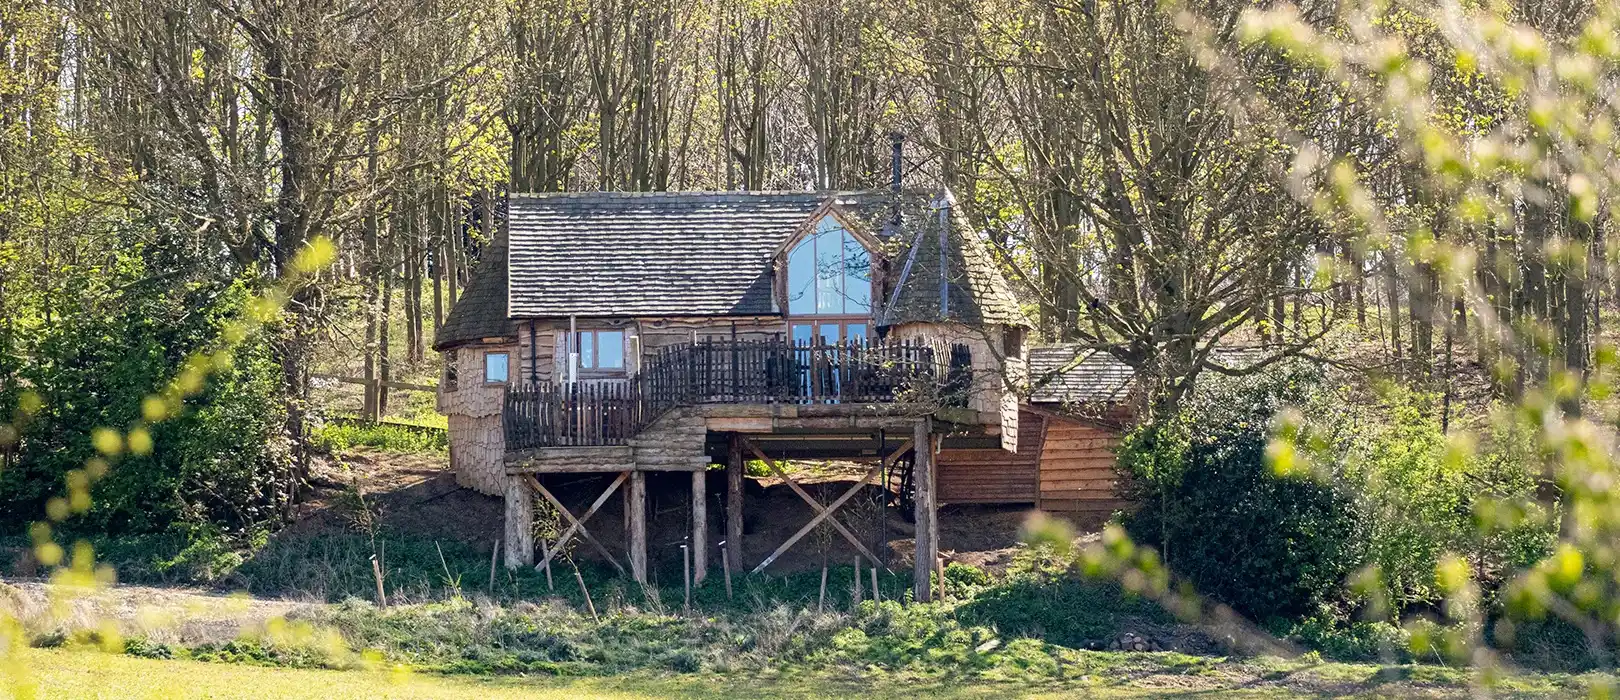 Treehouse holidays in Yorkshire